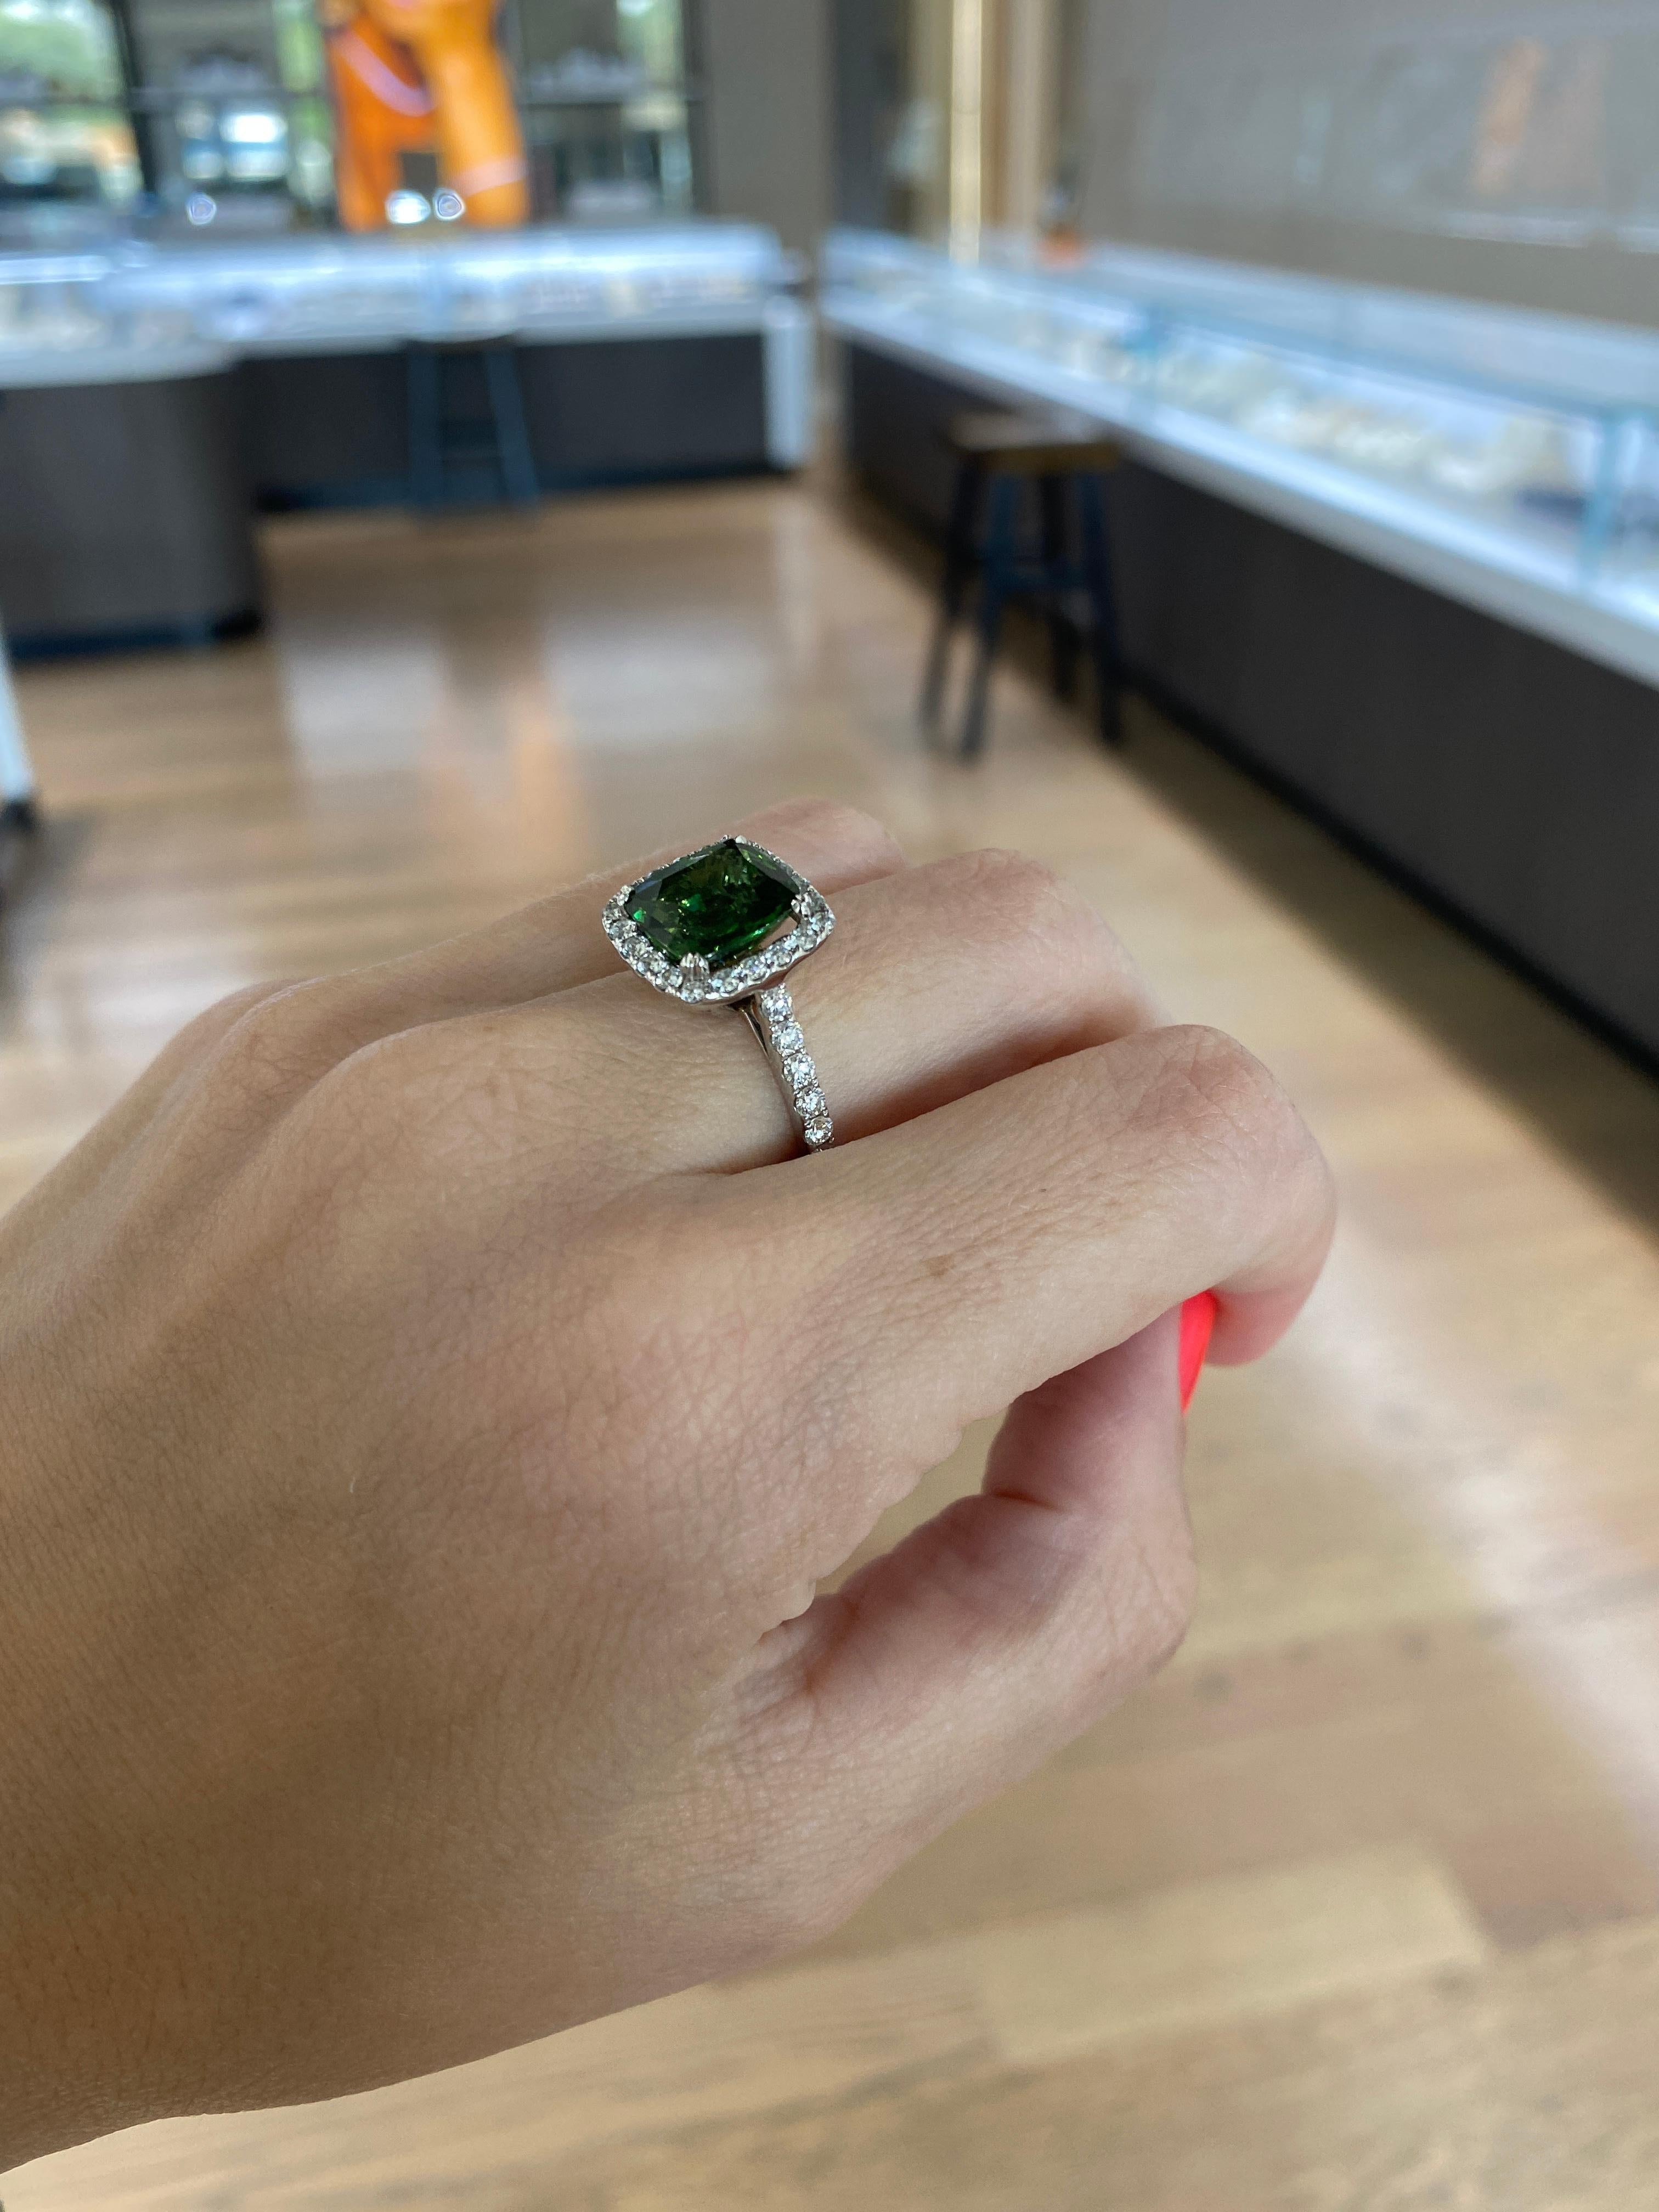 5.42 Carat Cushion Cut Green Zircon Ring with 0.52 Carat Total Diamond Halo For Sale 4